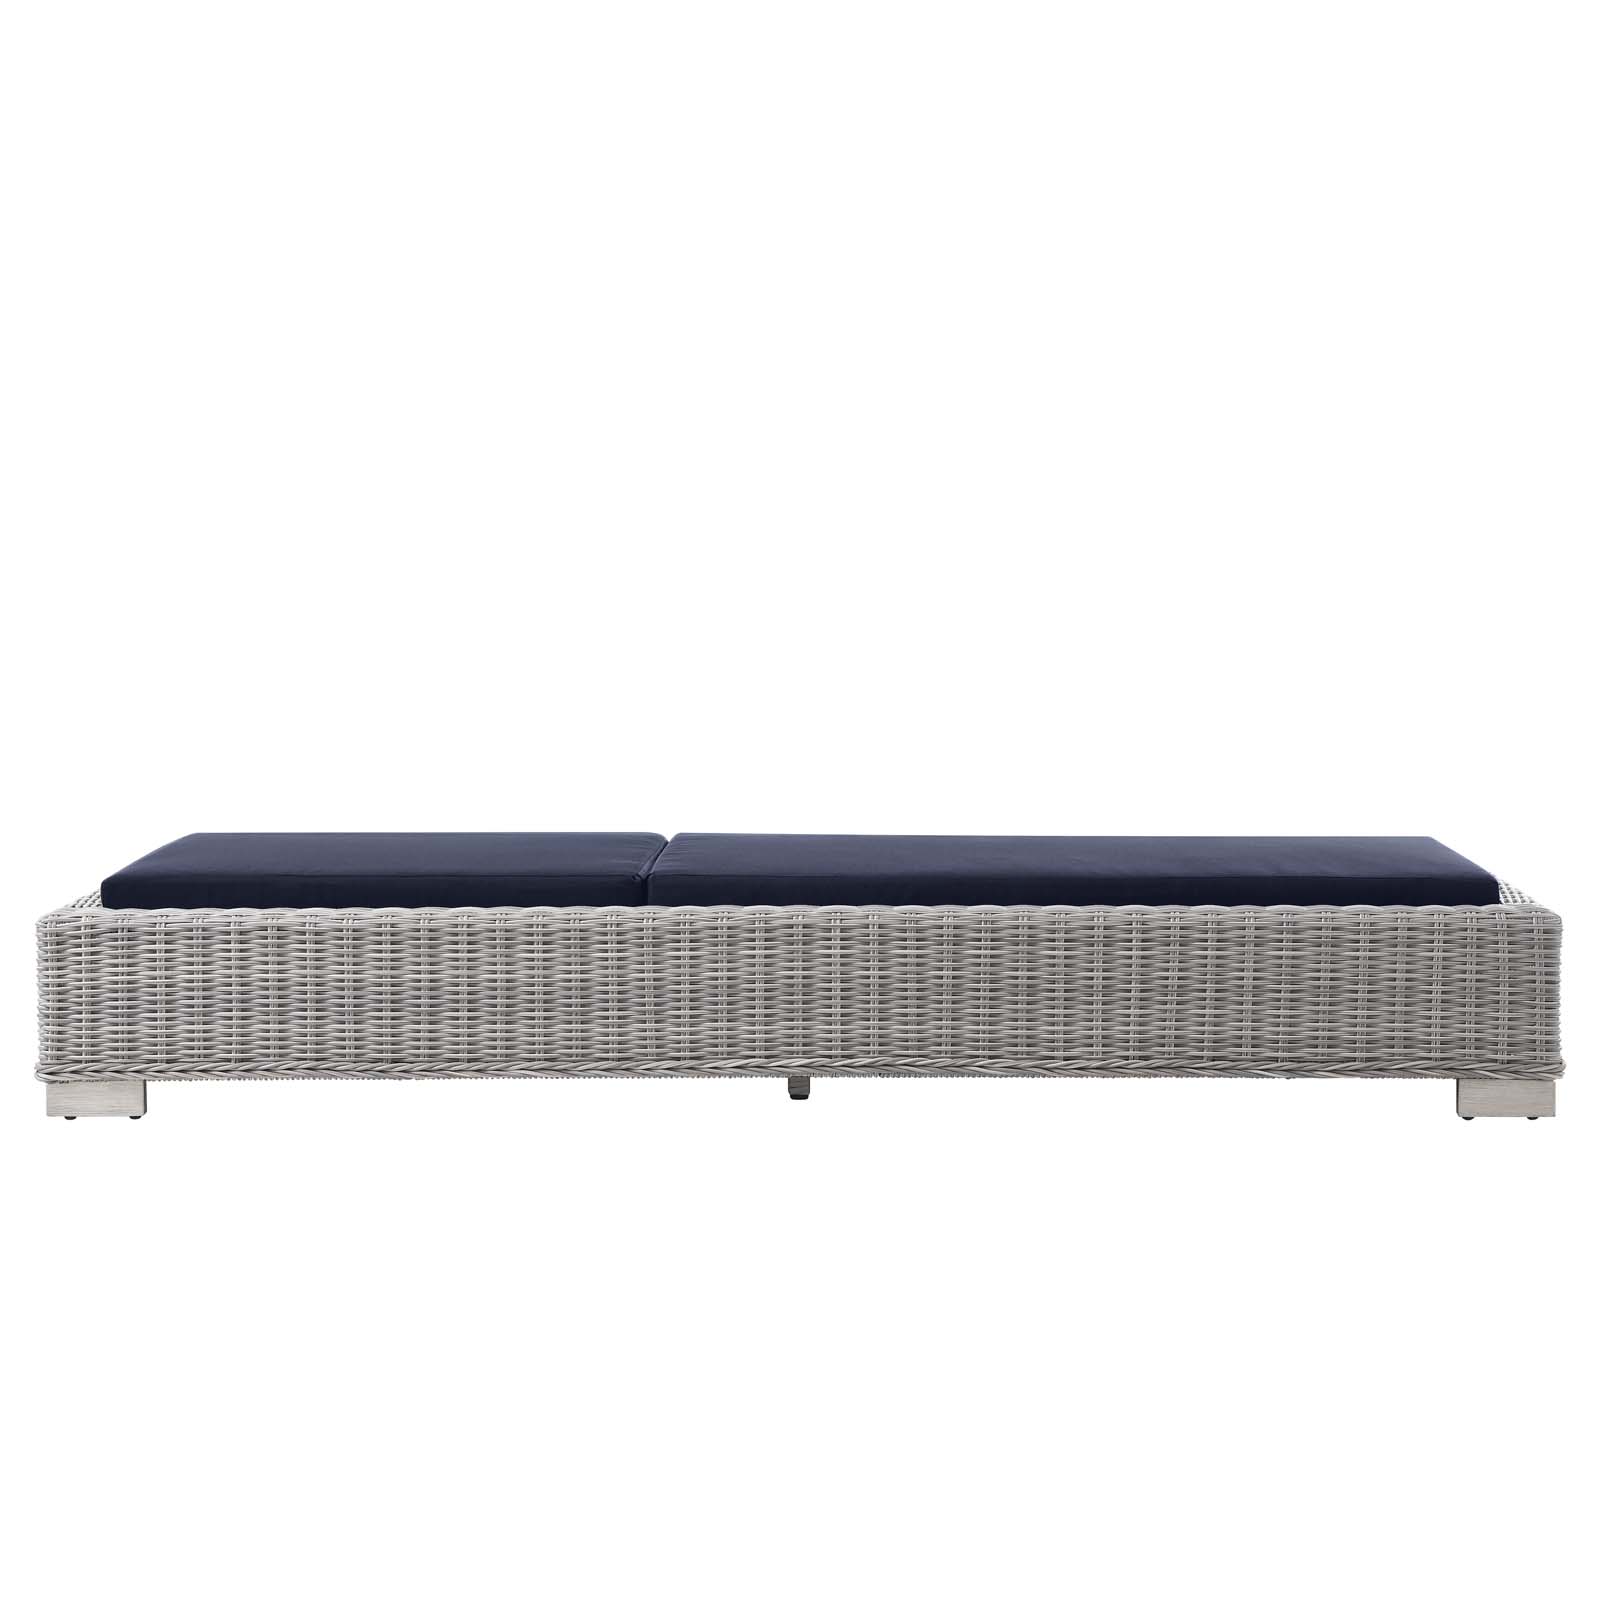 Modway Conway Outdoor Patio Wicker Rattan Chaise Lounge in Light Gray Navy - image 4 of 9